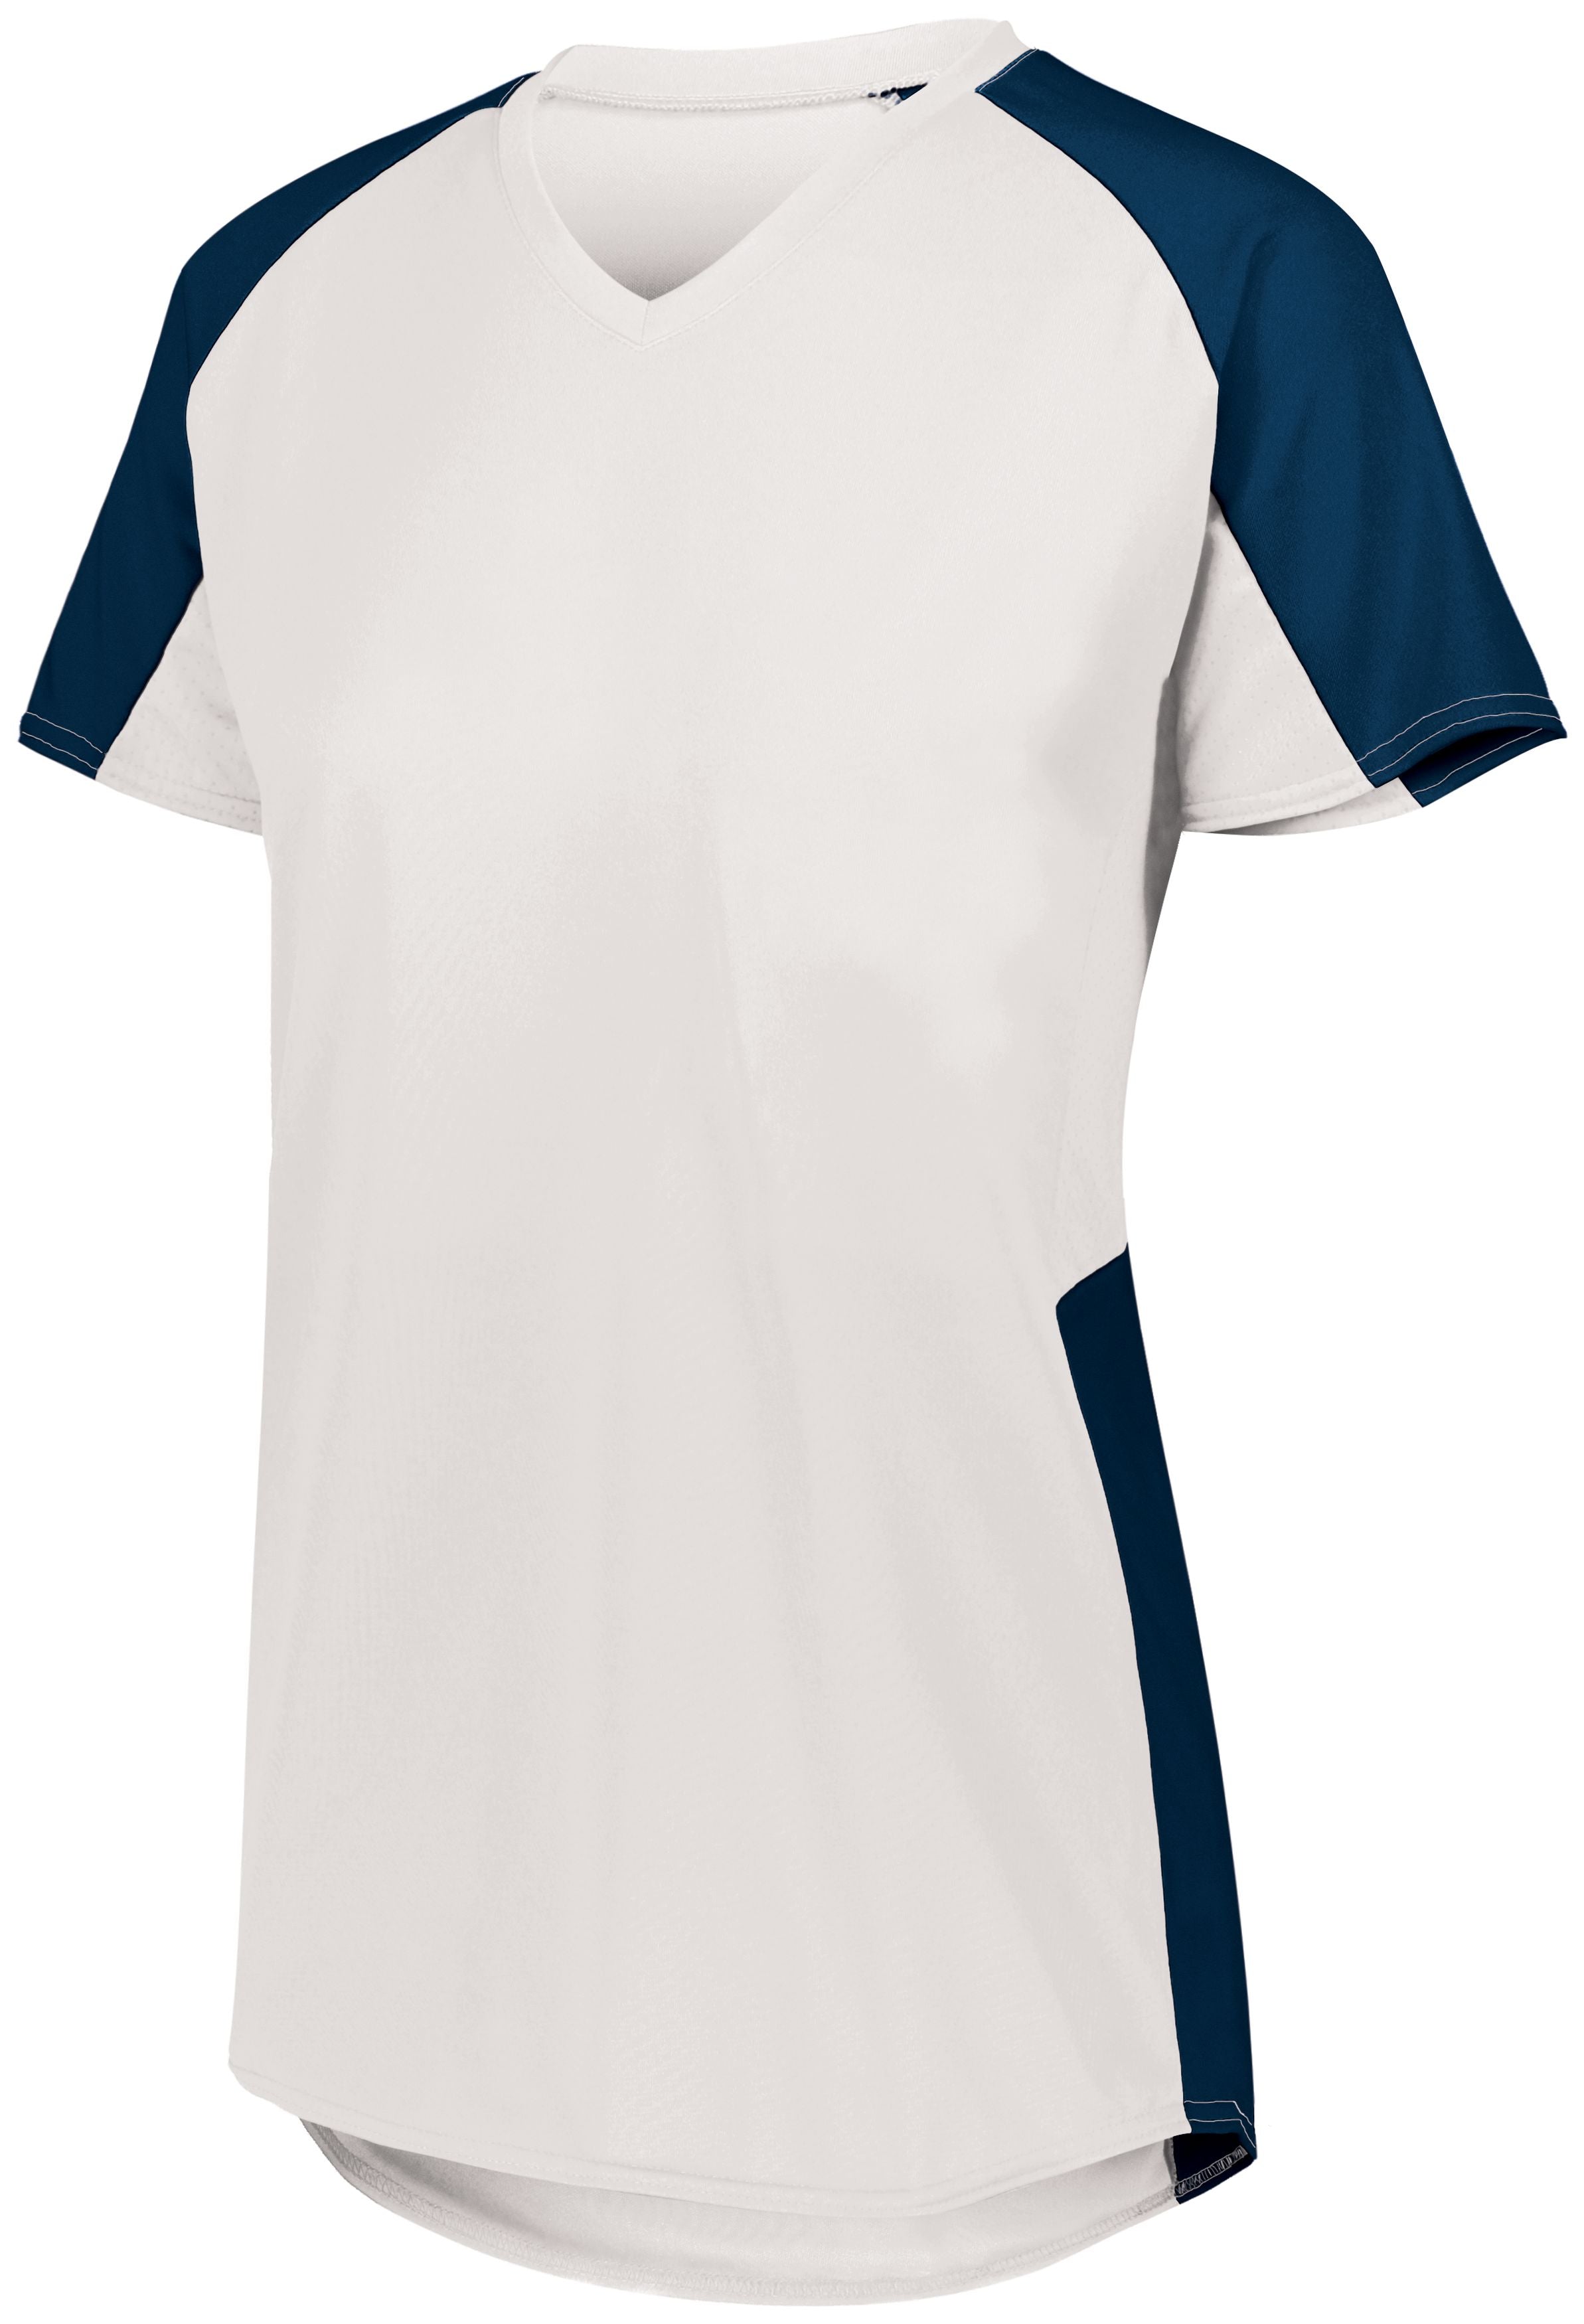 Augusta Sportswear Ladies Cutter Jersey in White/Navy  -Part of the Ladies, Ladies-Jersey, Augusta-Products, Softball, Shirts product lines at KanaleyCreations.com